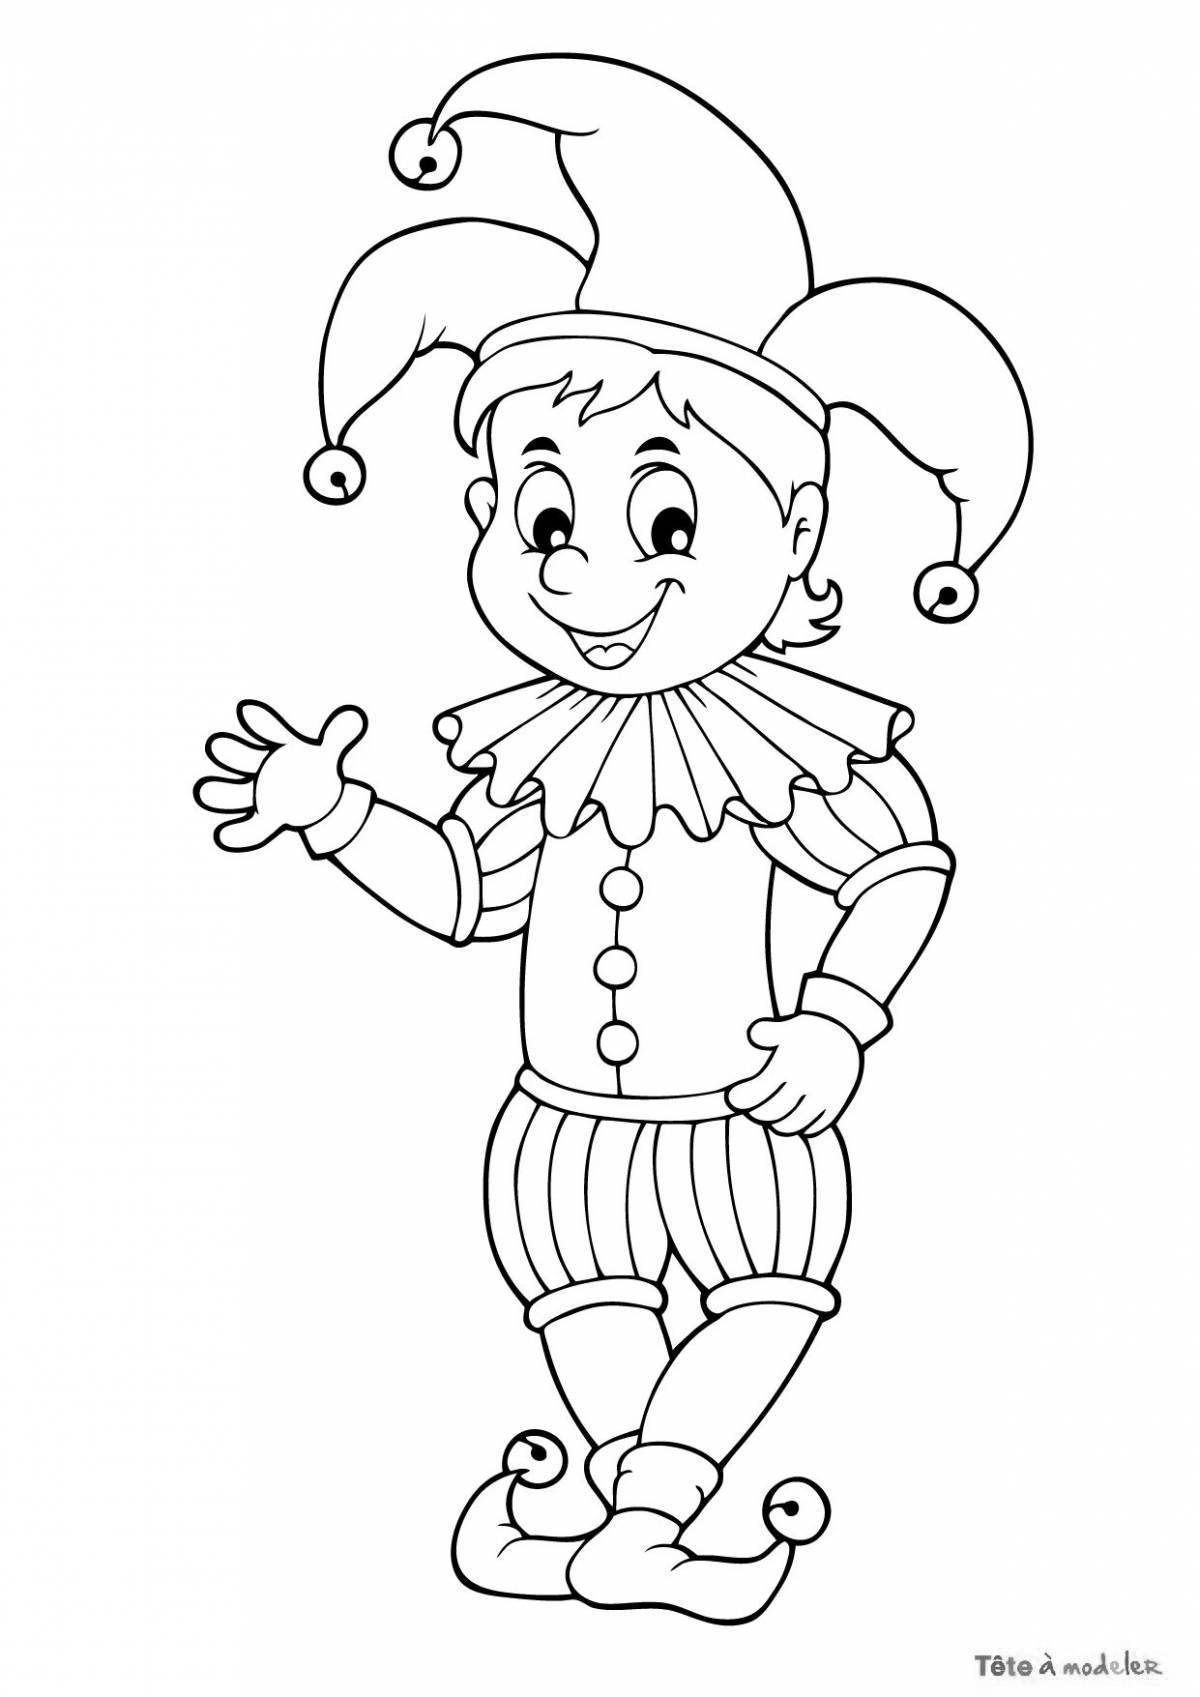 Coloring book dazzling jester